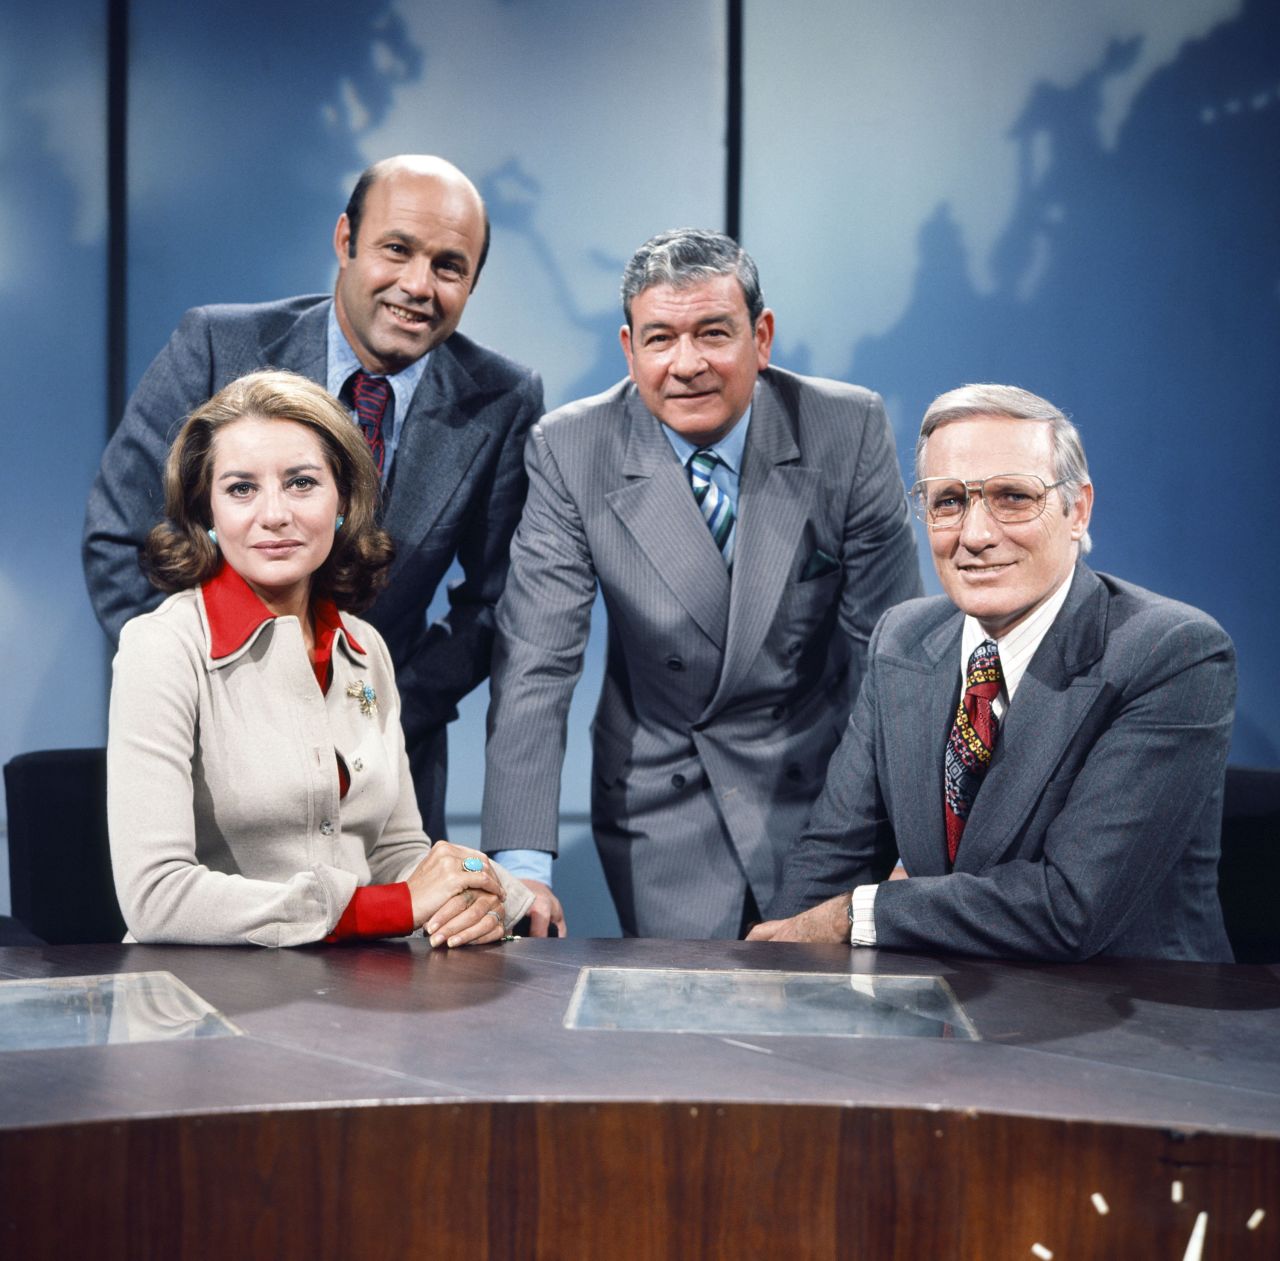 Walters with her "Today" show colleagues in 1971: from left, Joe Garagiola, Frank Blair and Frank McGee.